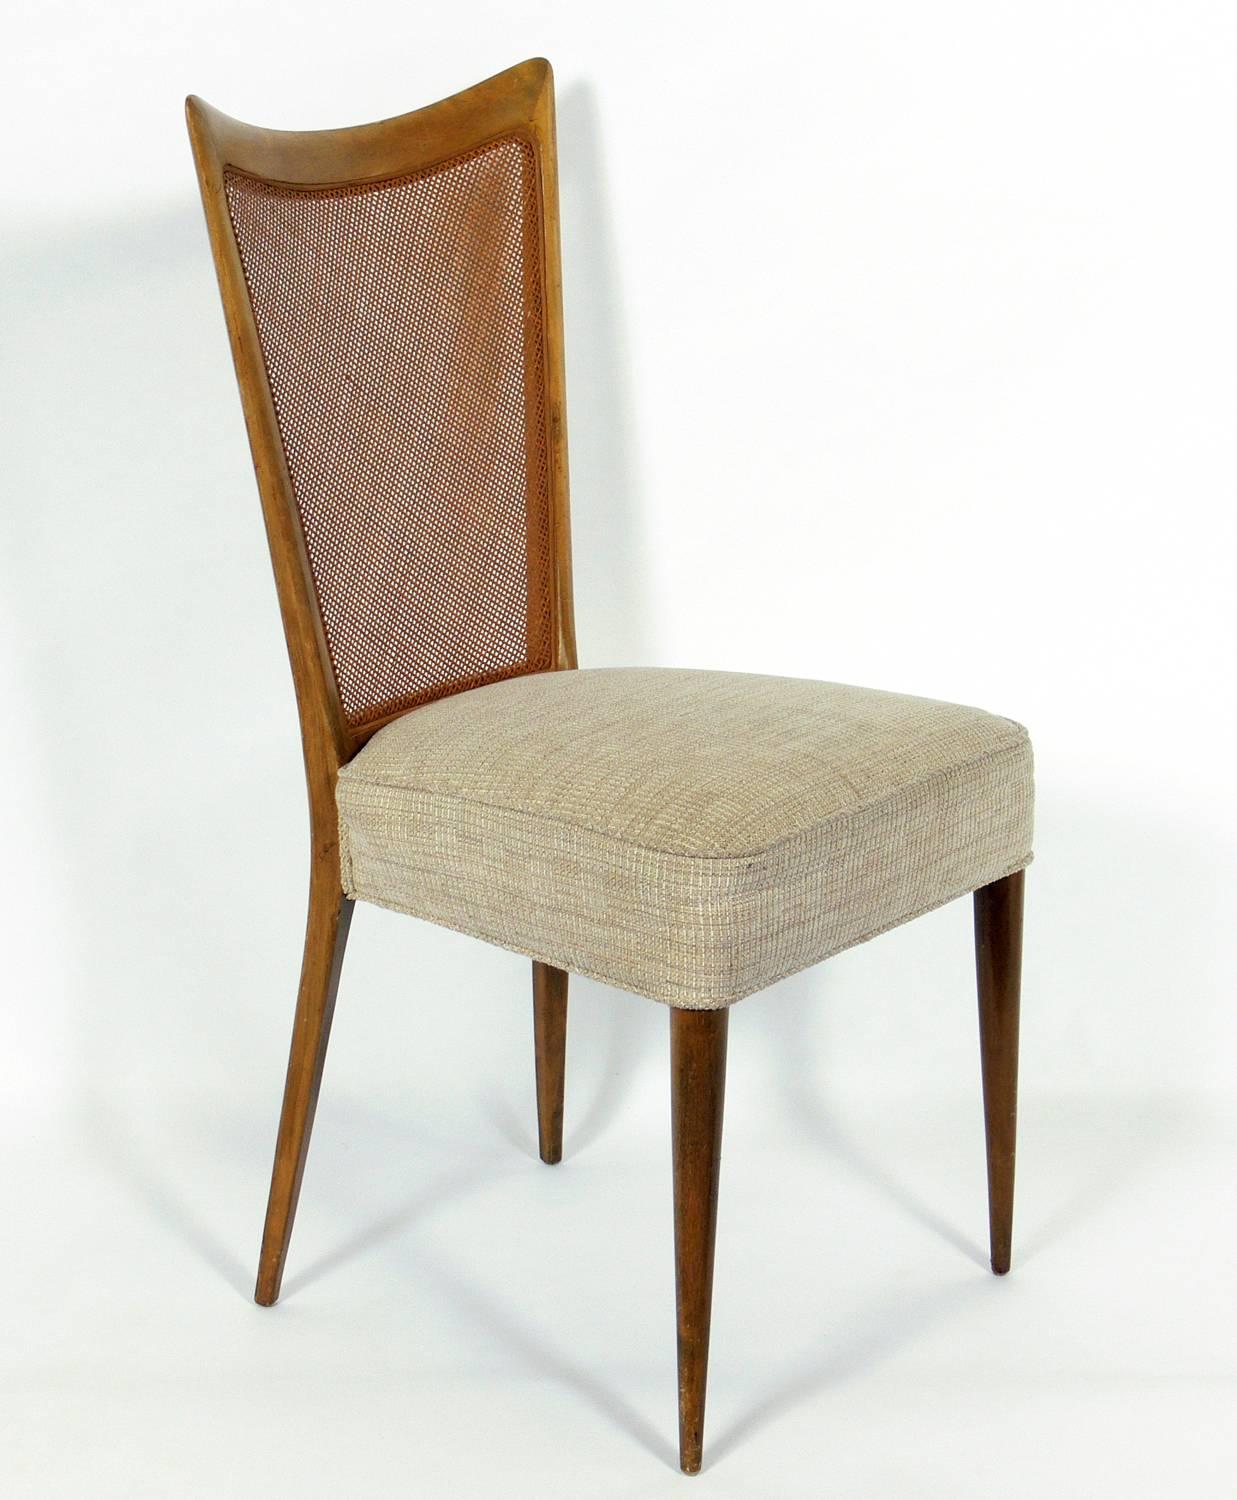 Set of four Italian modern cane back dining chairs, designed by Melchiorre Bega, Italian, circa 1950s. These chairs are currently being refinished and reupholstered. The price noted below includes refinishing in your choice of color and reupholstery